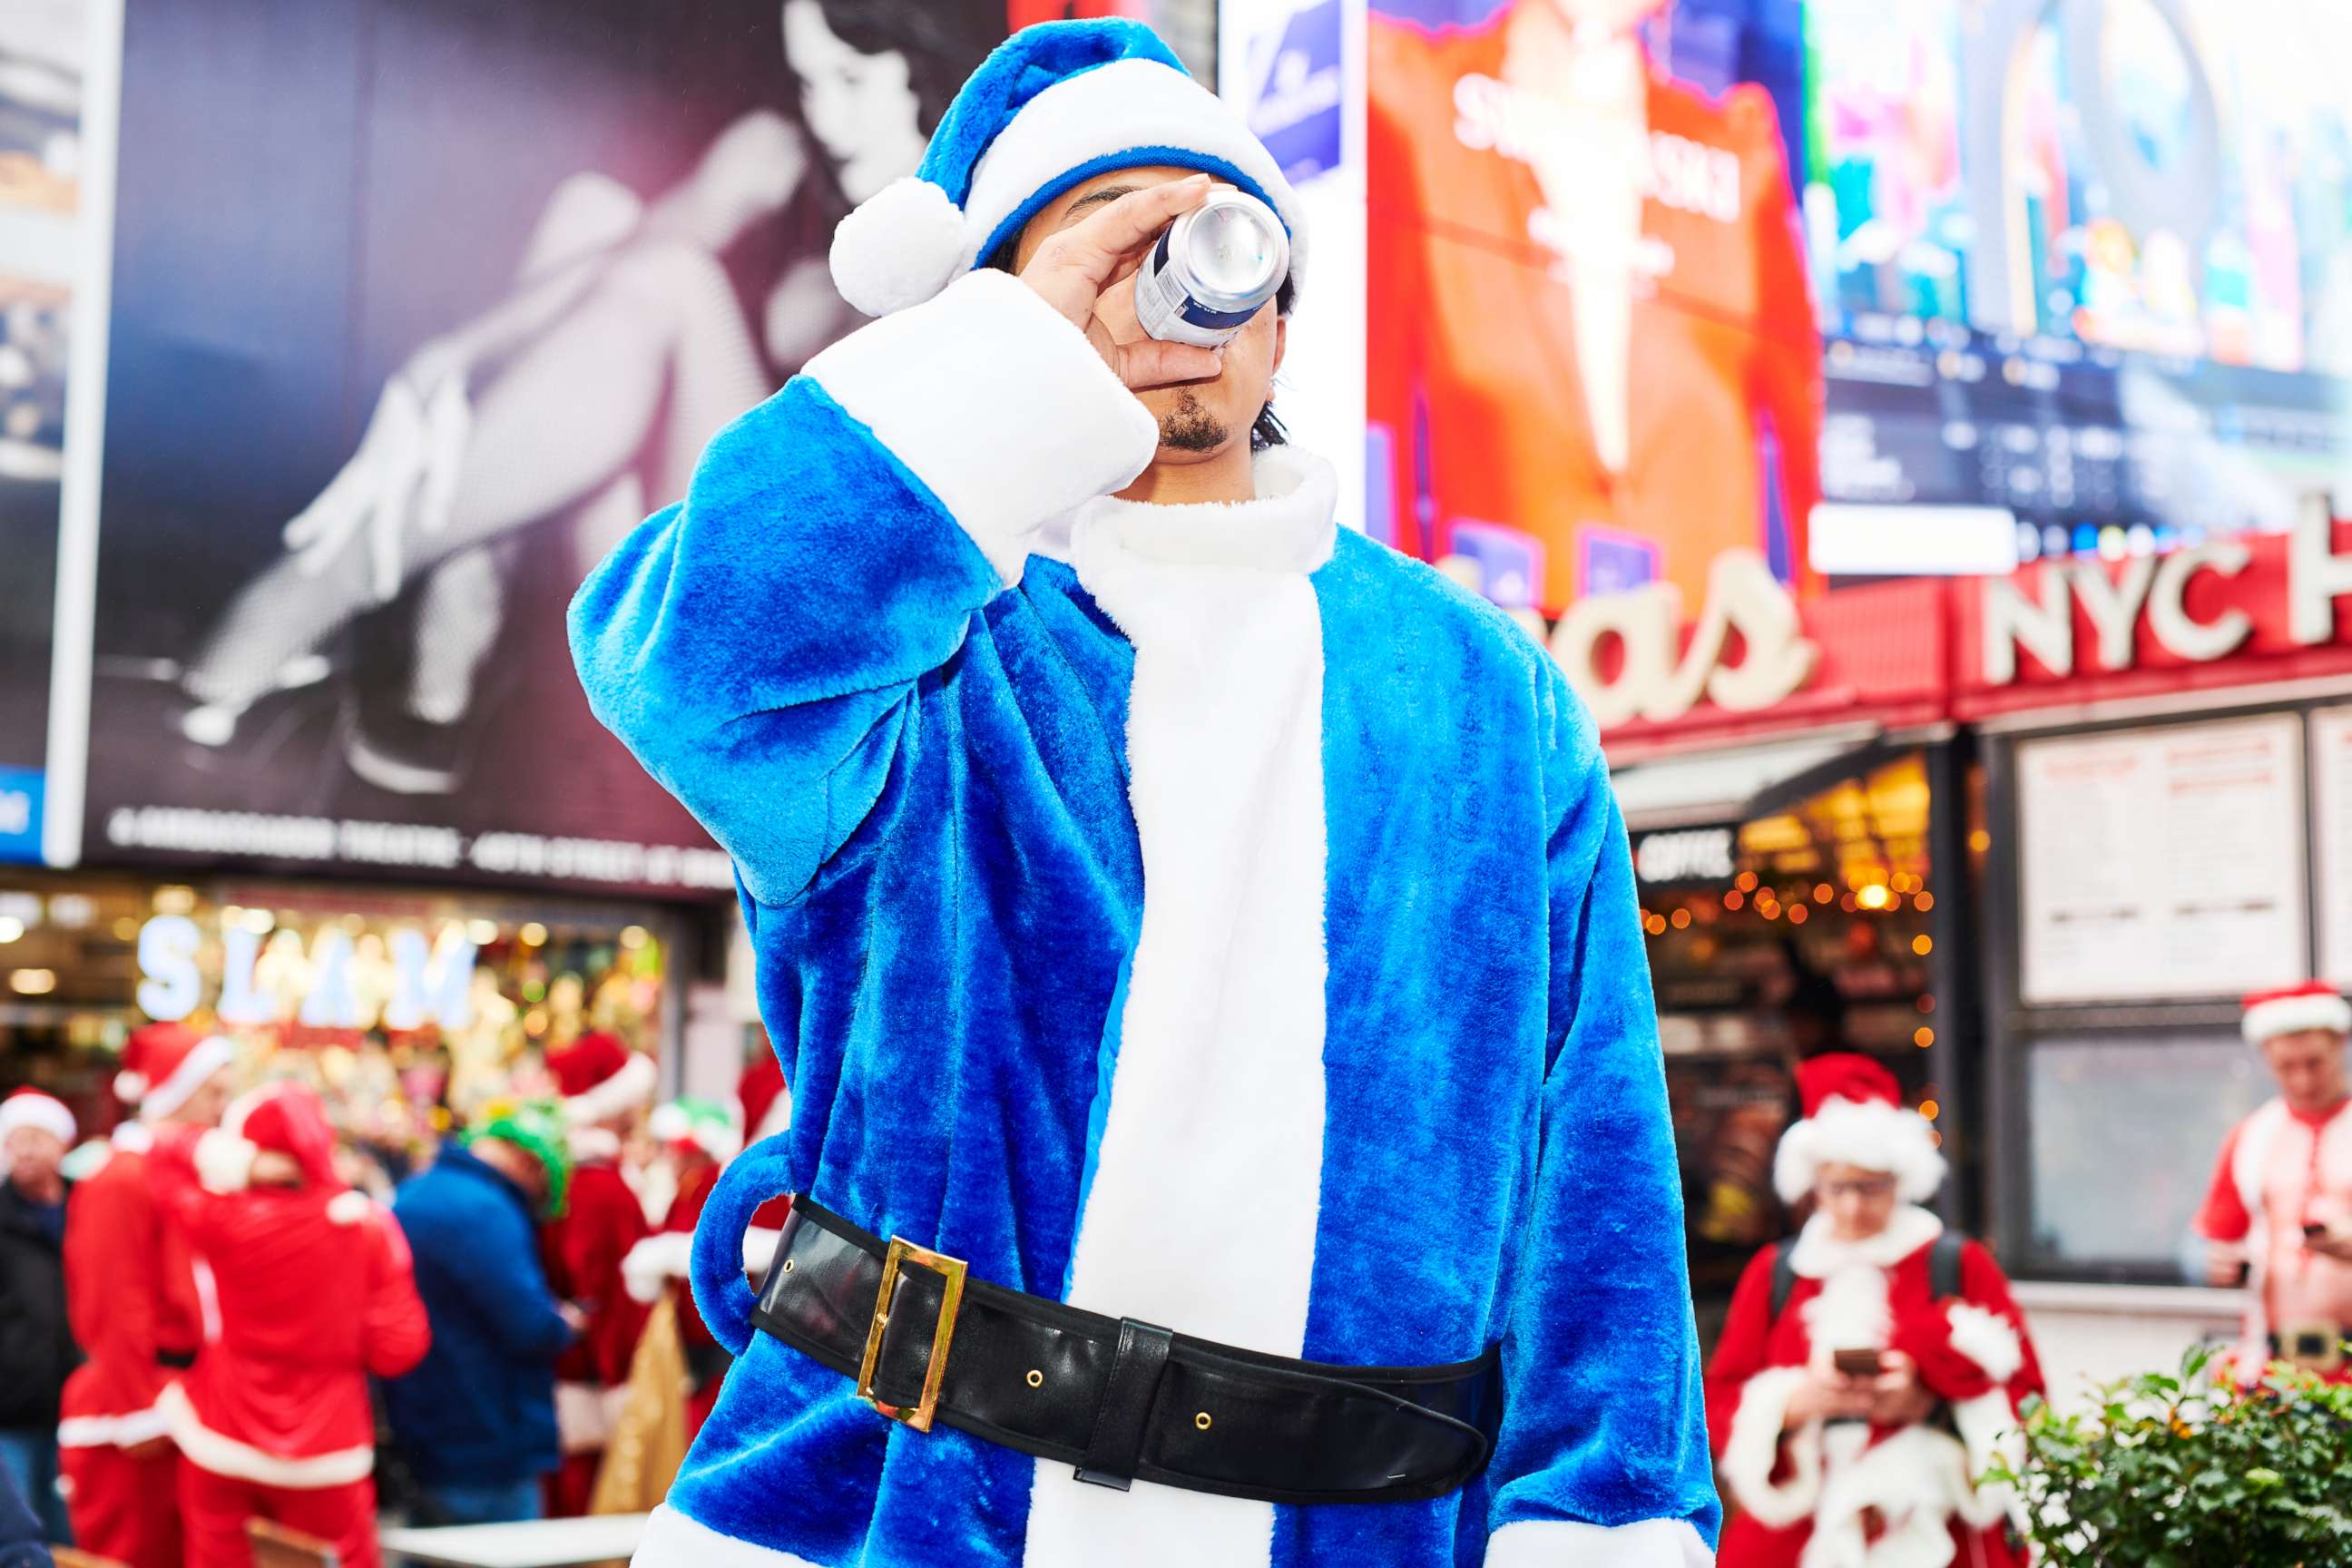 PHOTO: A person dressed as Santa Claus drinks a beer at Father Duffy Square for SantaCon on Dec. 14, 2019 in New York City. Every year, people dress up as Santa Claus or in other holiday-themed costumes and drink at multiple bars across the city.